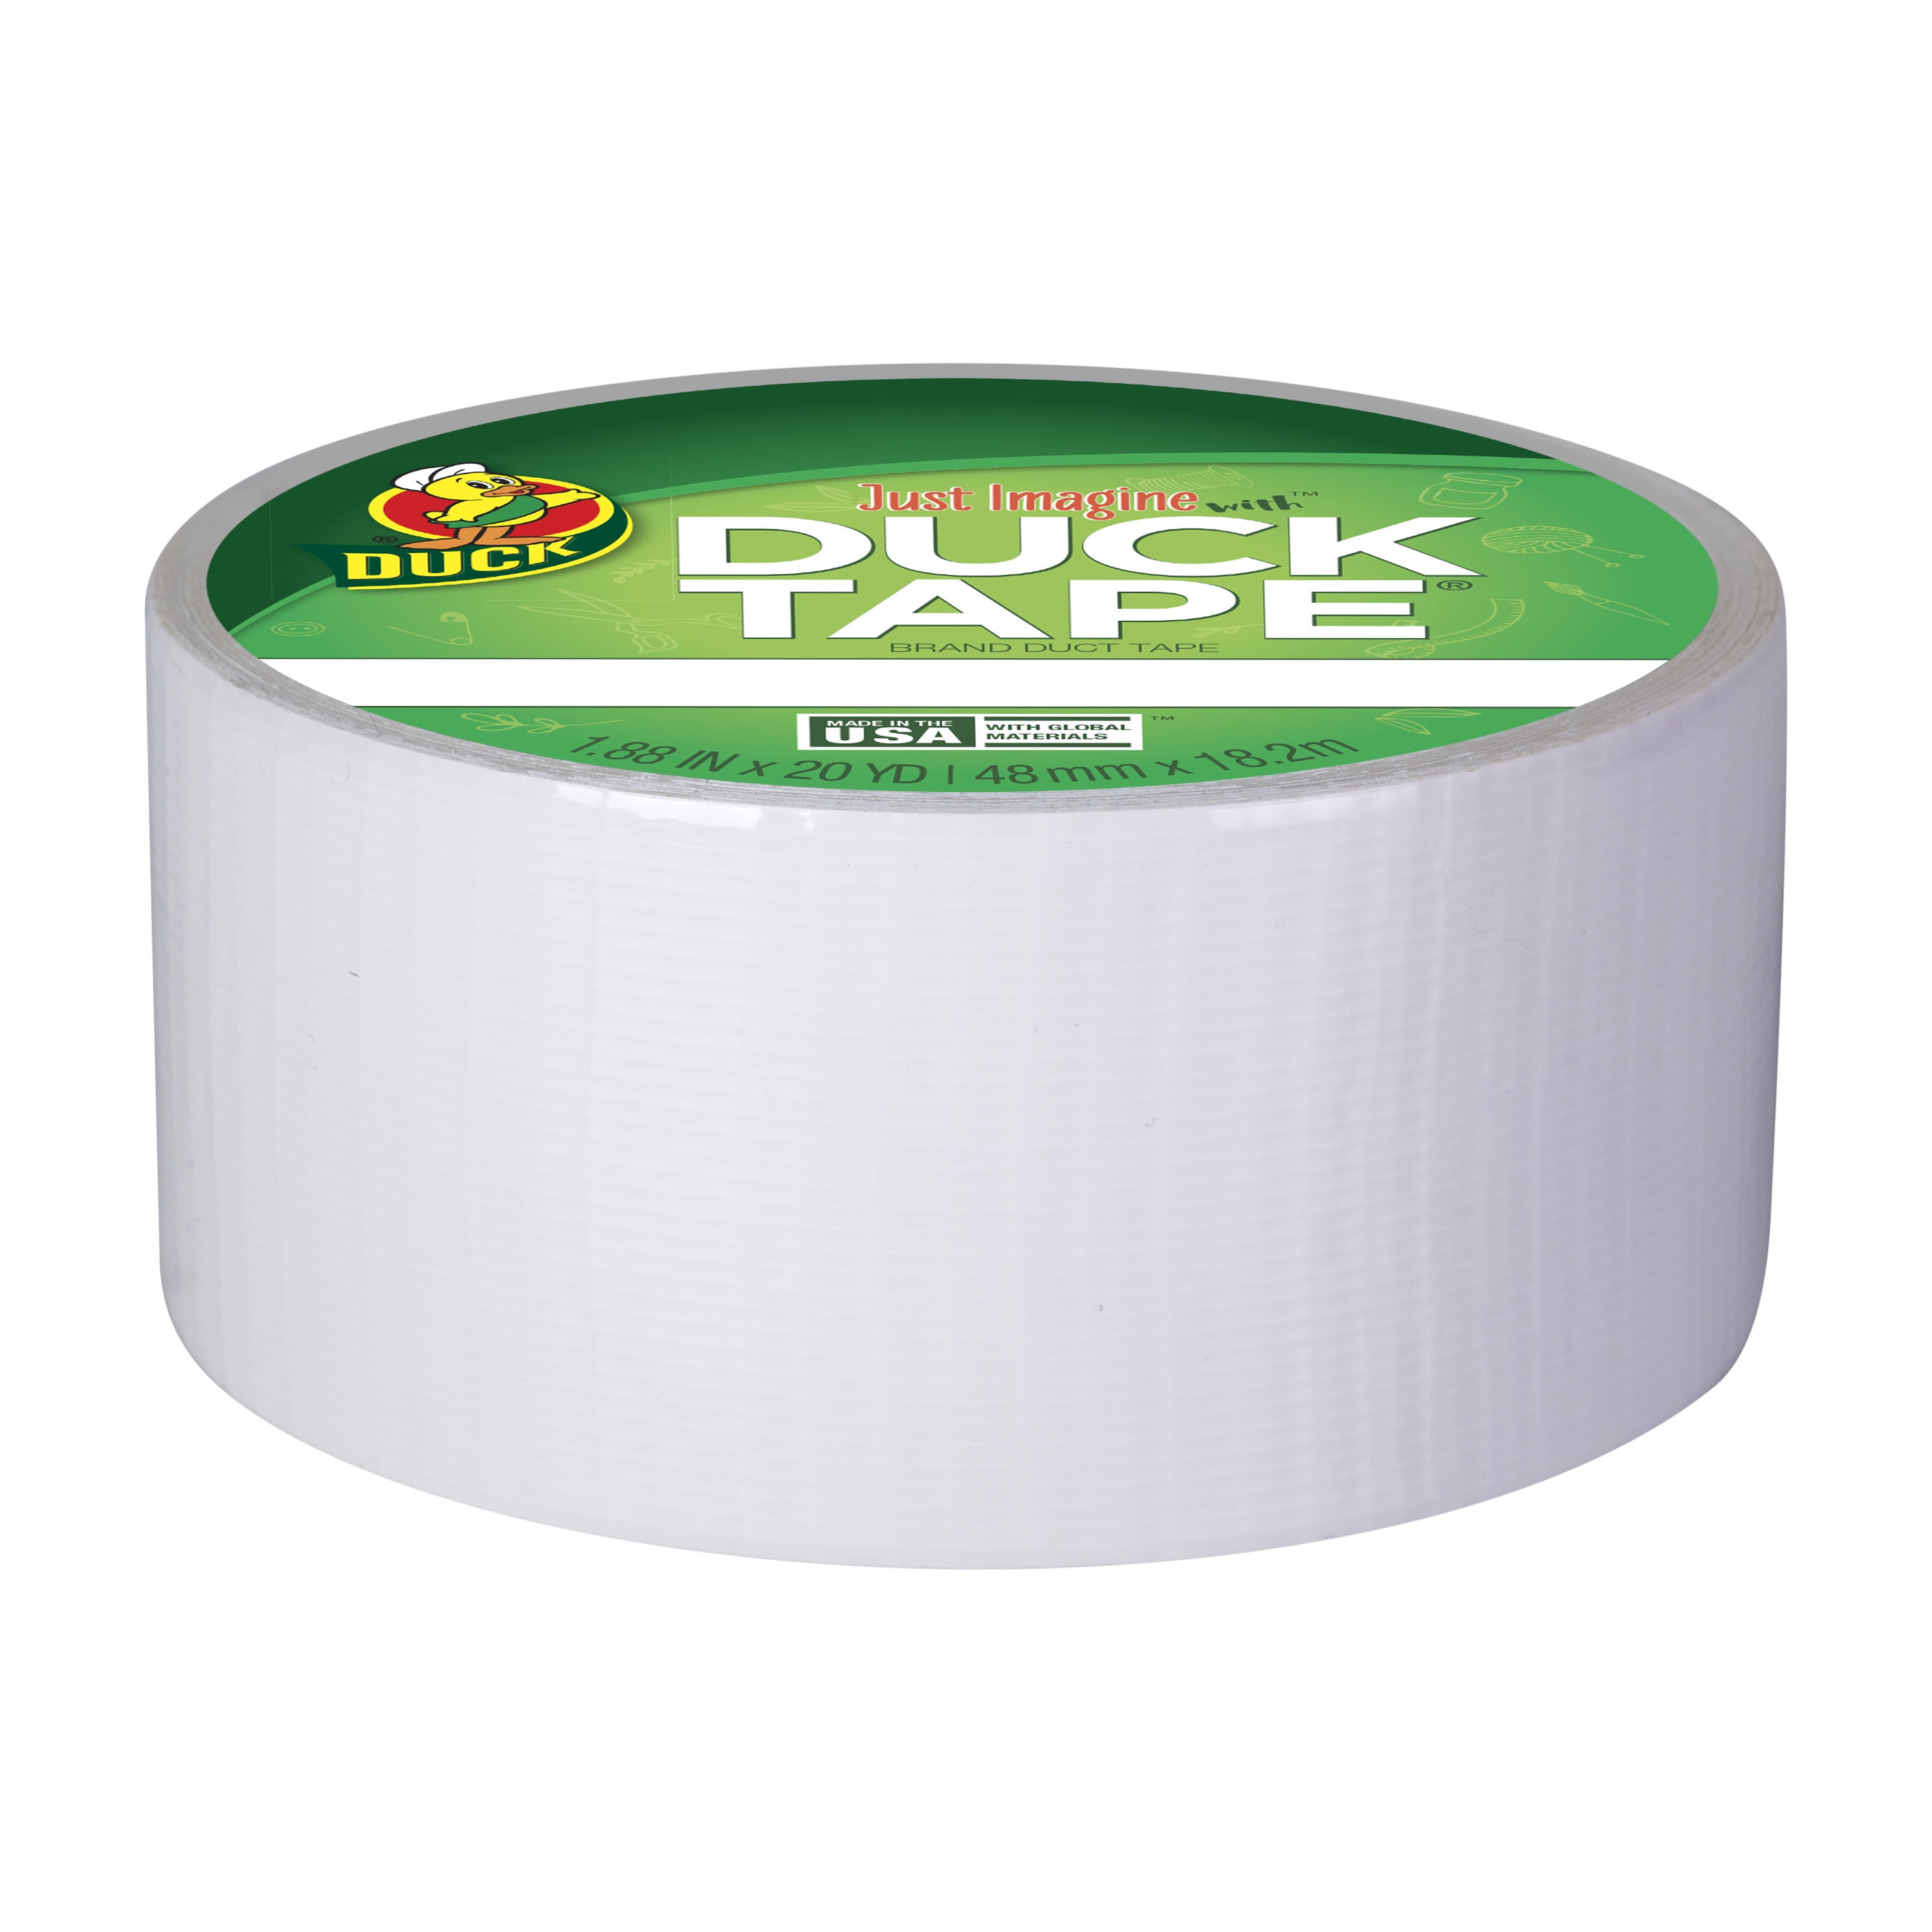 Duck Brand 1265015 Color Duct Tape, White, 1.88 Inches x 20 Yards